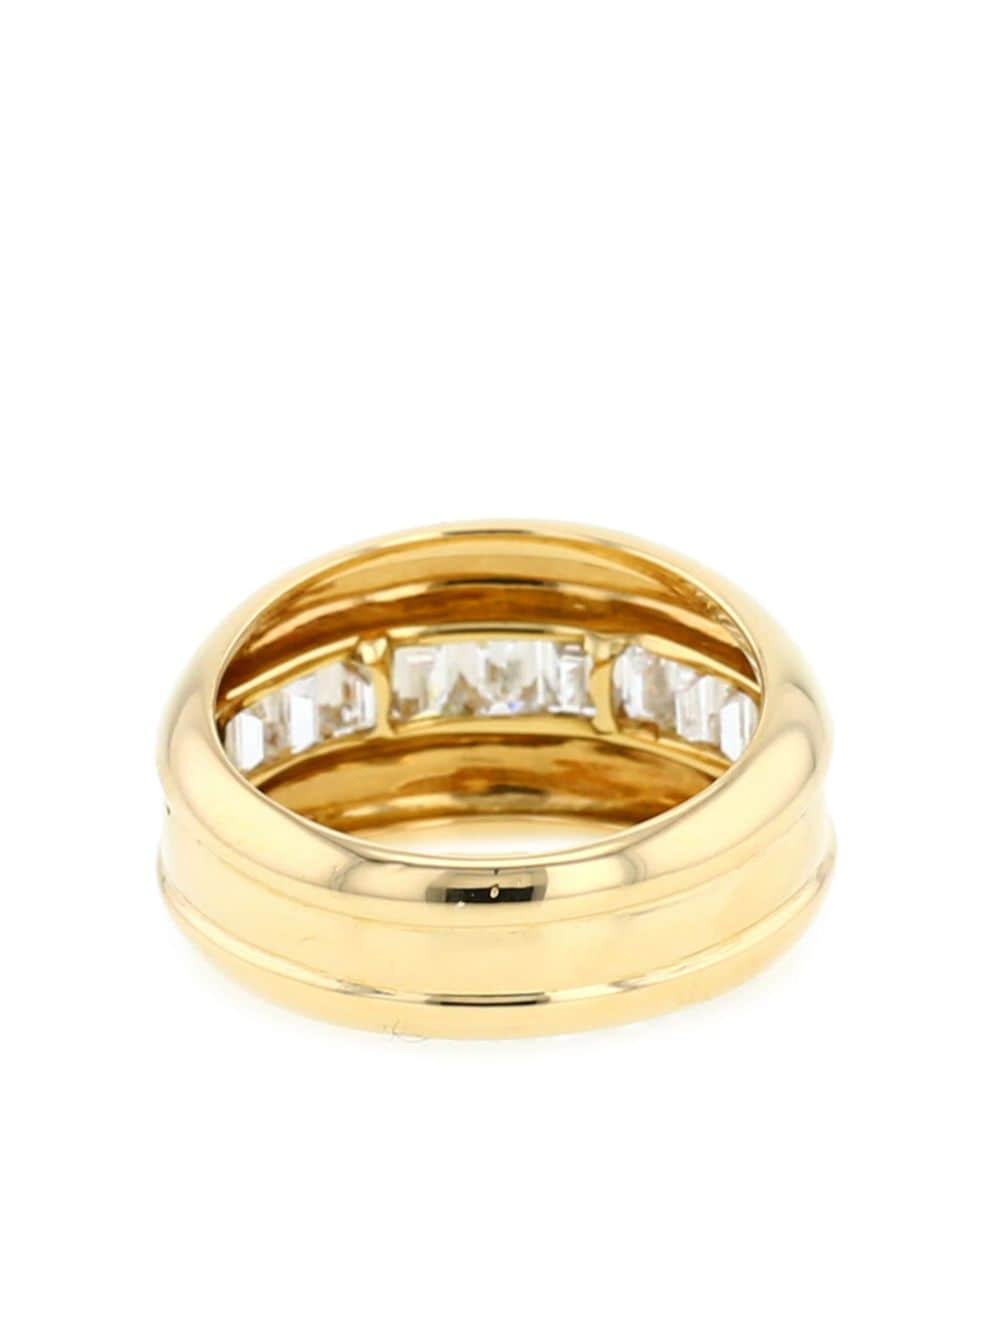 Pre-owned Cartier 1990s Yellow Gold Diamond Ring